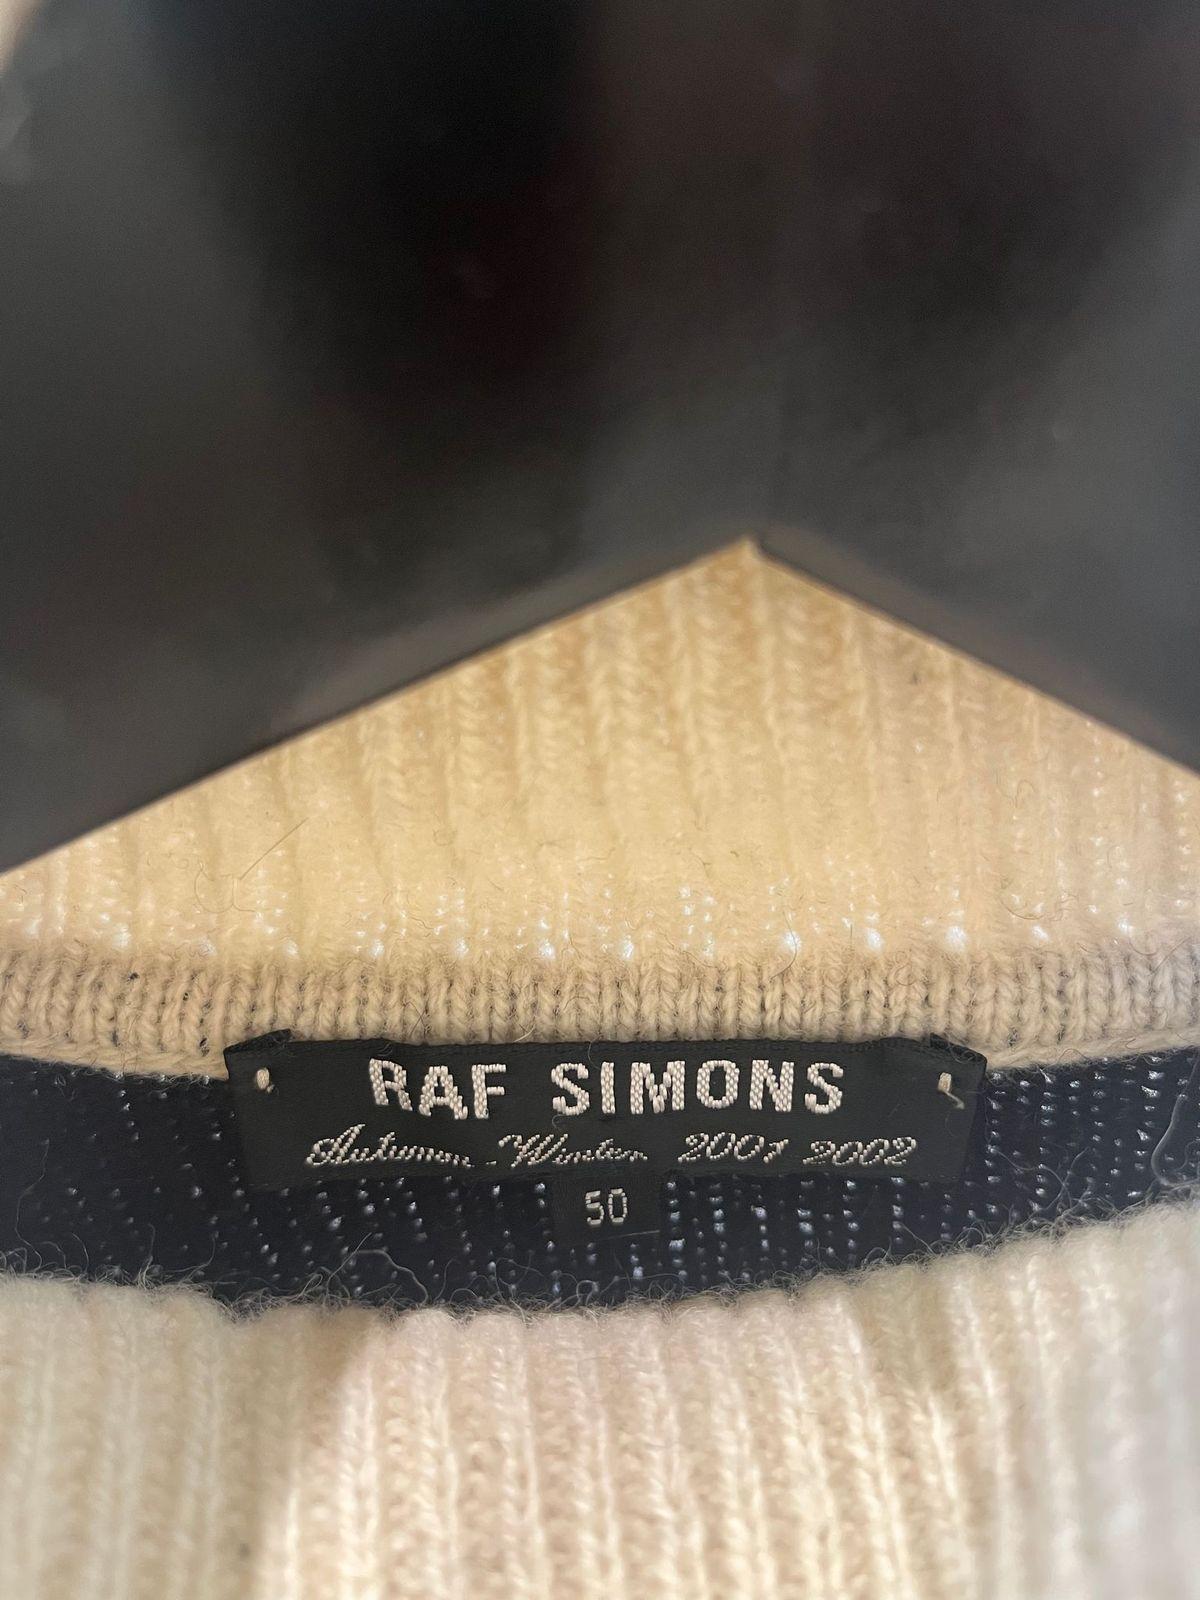 Raf Simons AW 2001 Riot Riot Riot Distressed Knit Sweater In Good Condition For Sale In LISSE, NL